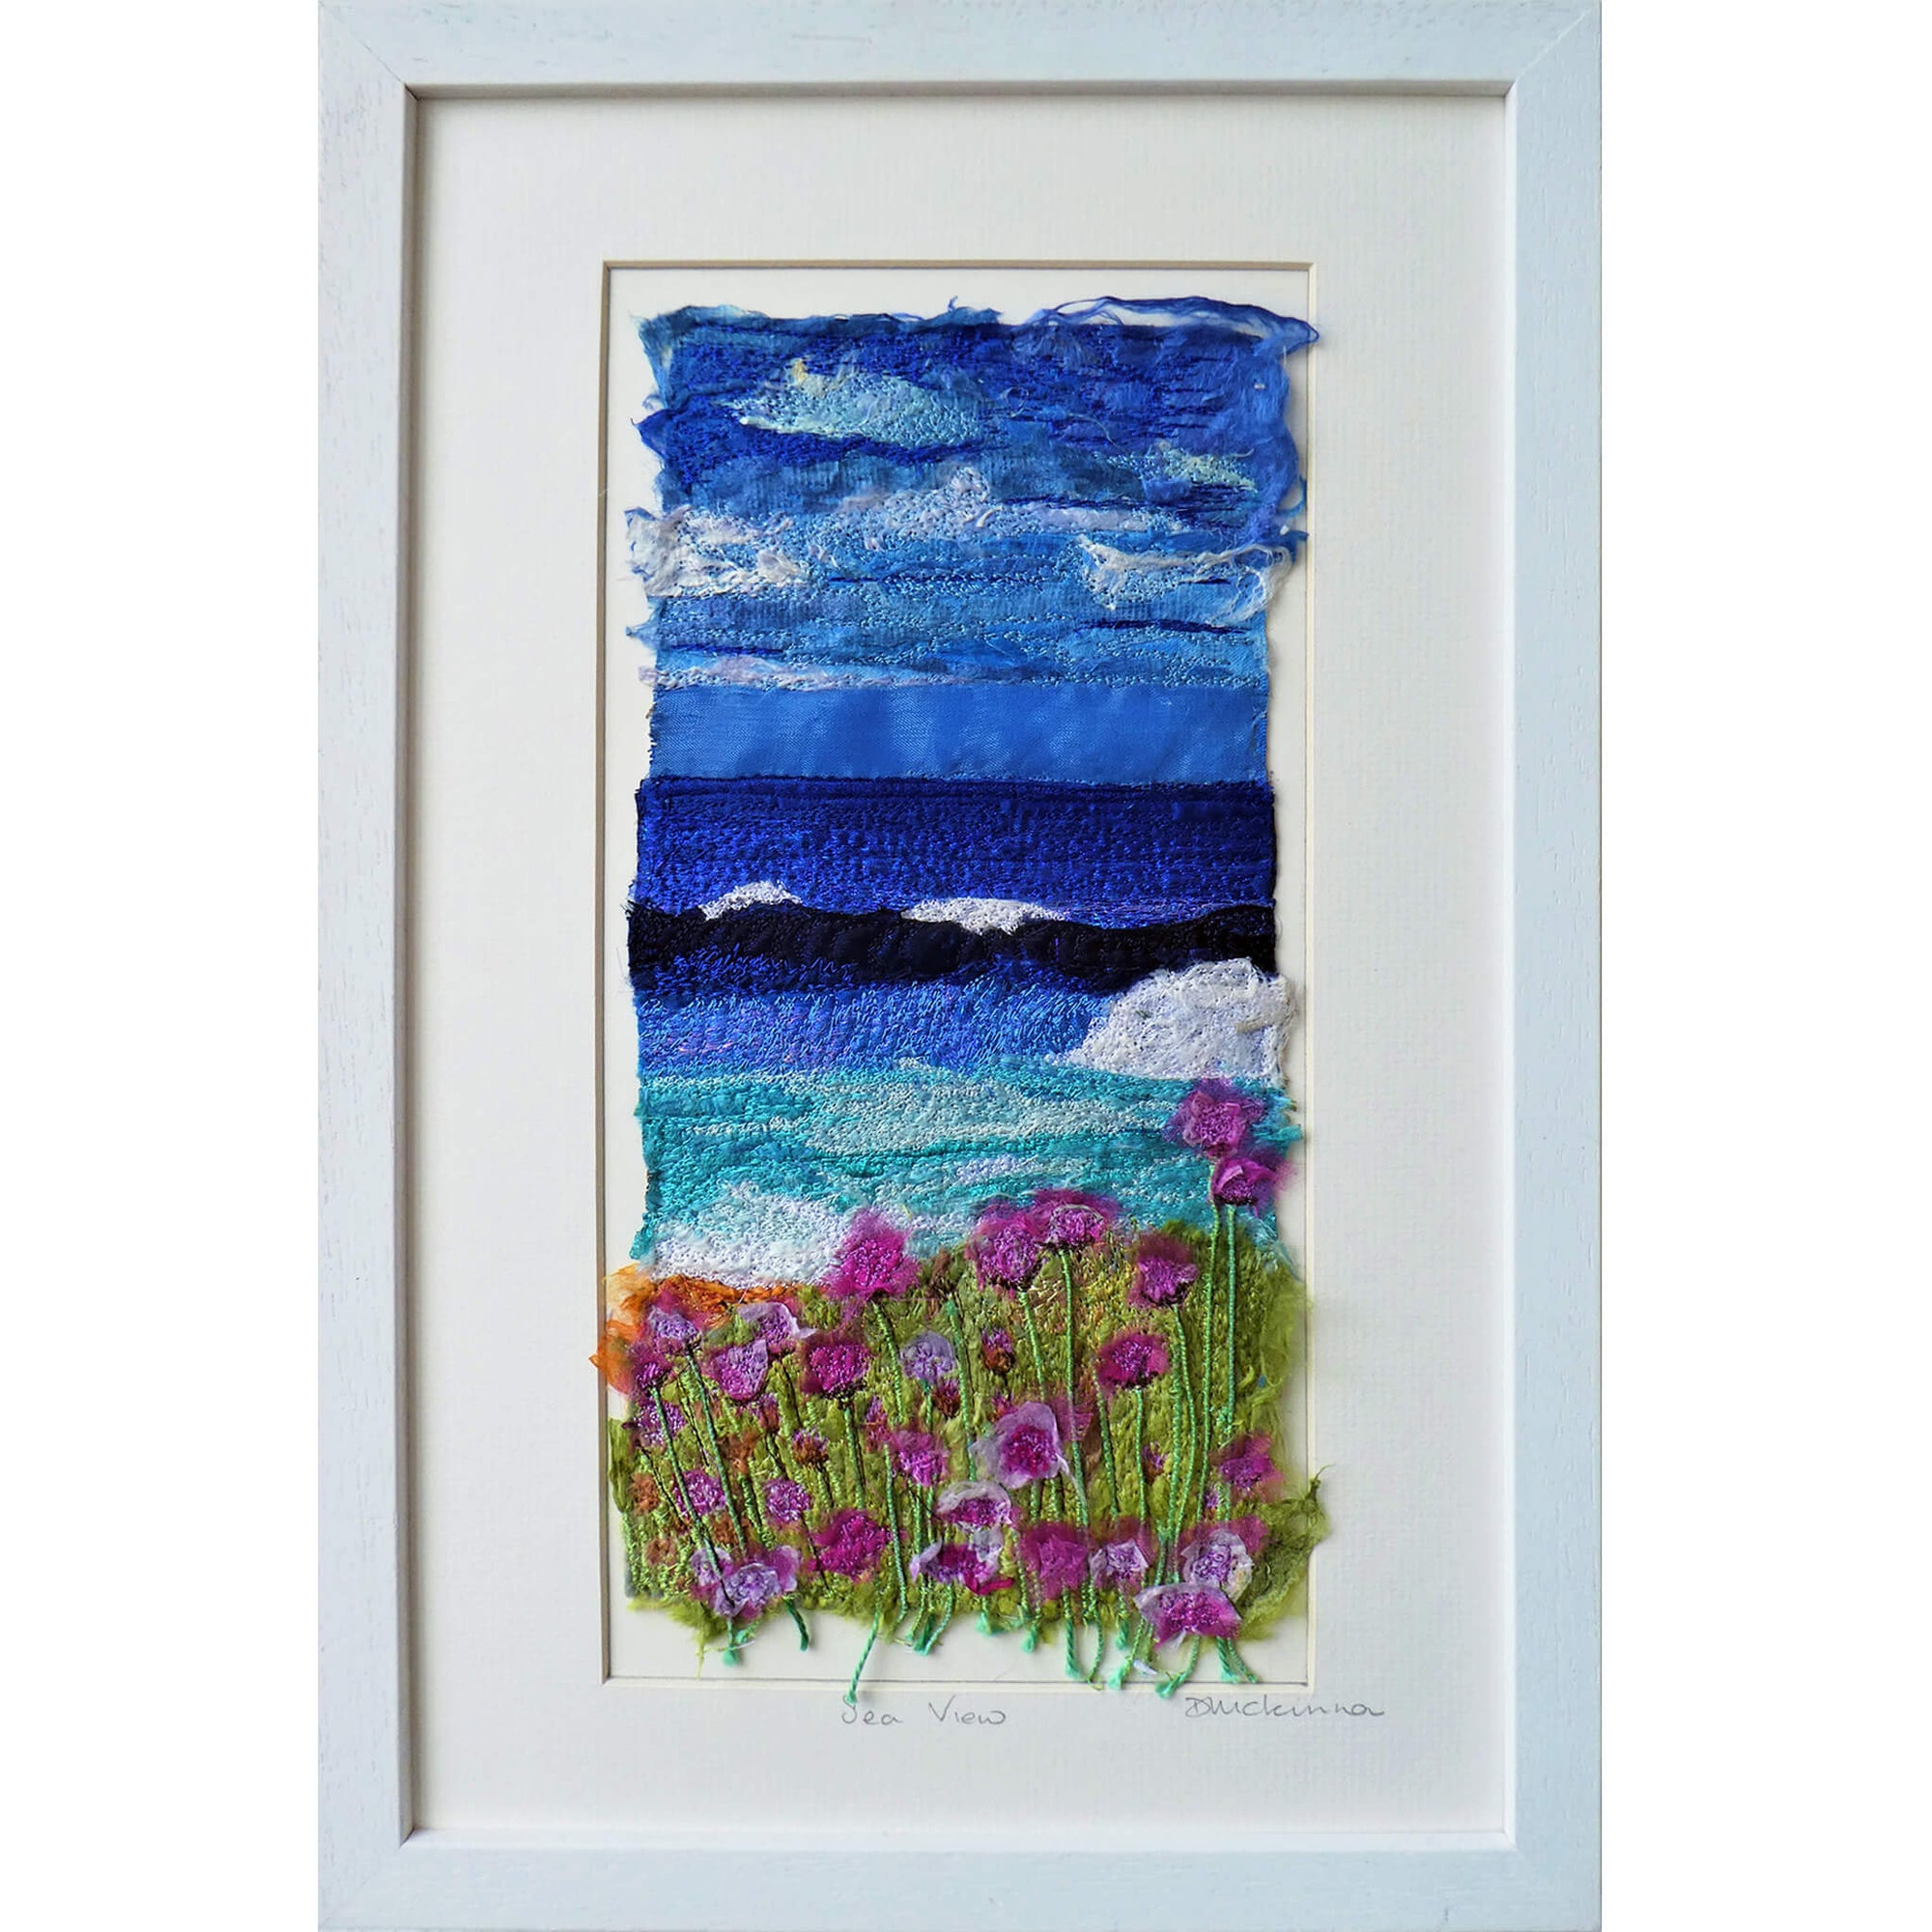 Sea View by Diana Mckinnon silk embroidery artist comprising blue sky, ocean and pink coastal flowers in white frame